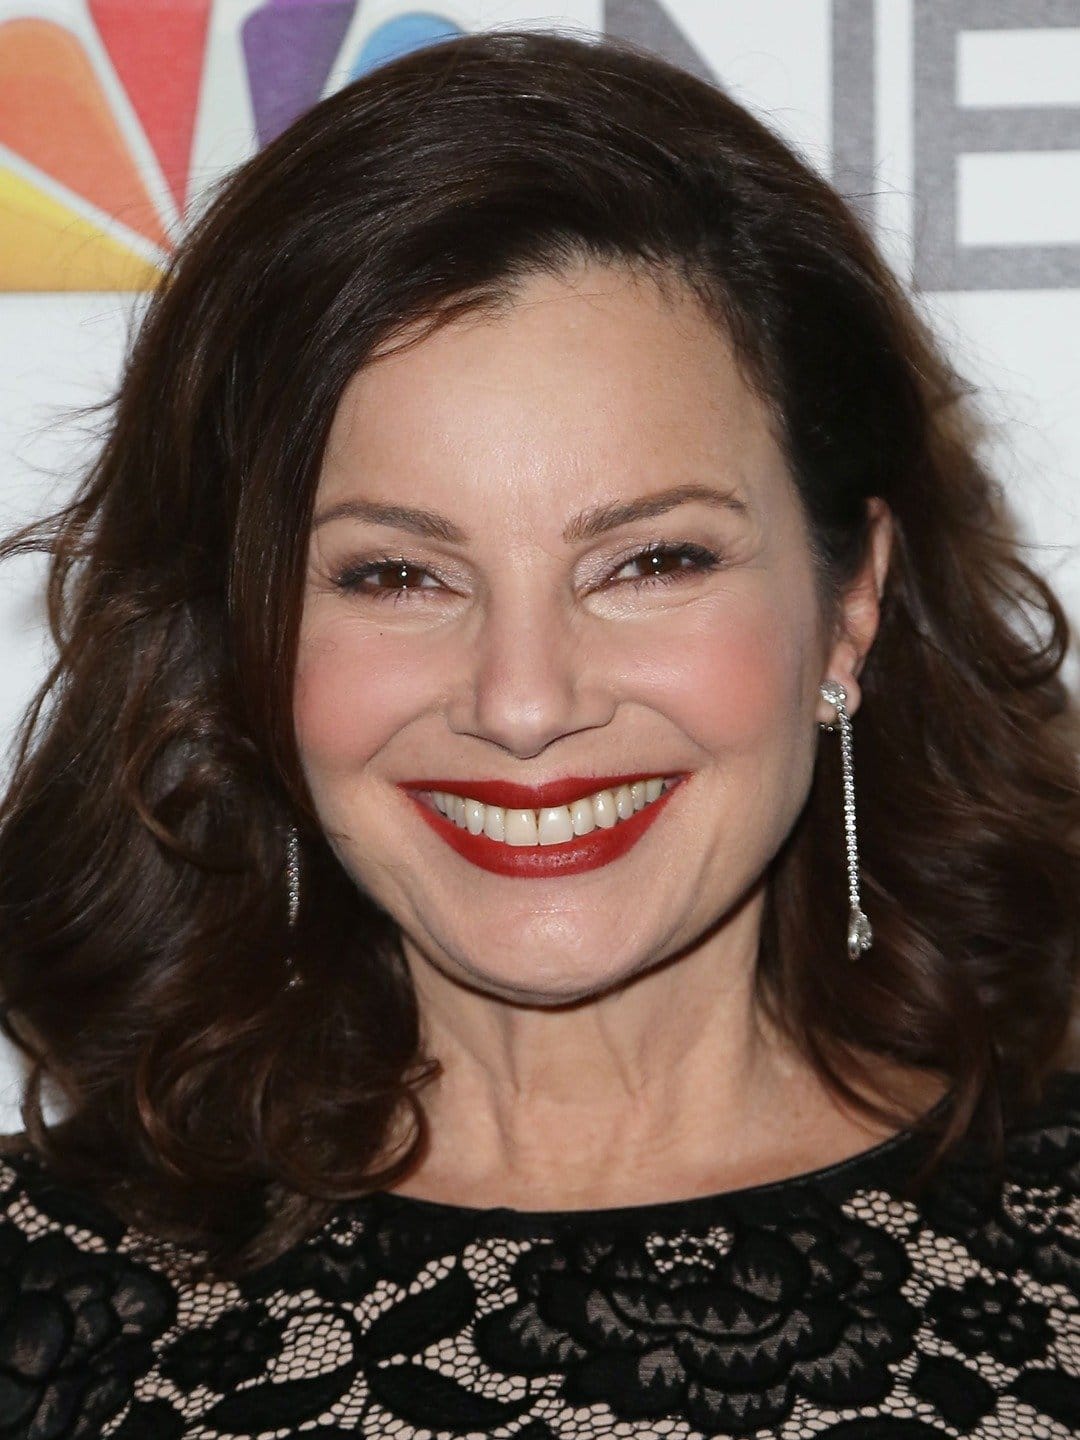 Mandatory Credit: Photo by Patrick Lewis/Starpix/Shutterstock (10537554q)
Fran Drescher
NBC & The Cinema Society host a party for the casts of NBC's midseason 2020, New York, USA - 23 Jan 2020